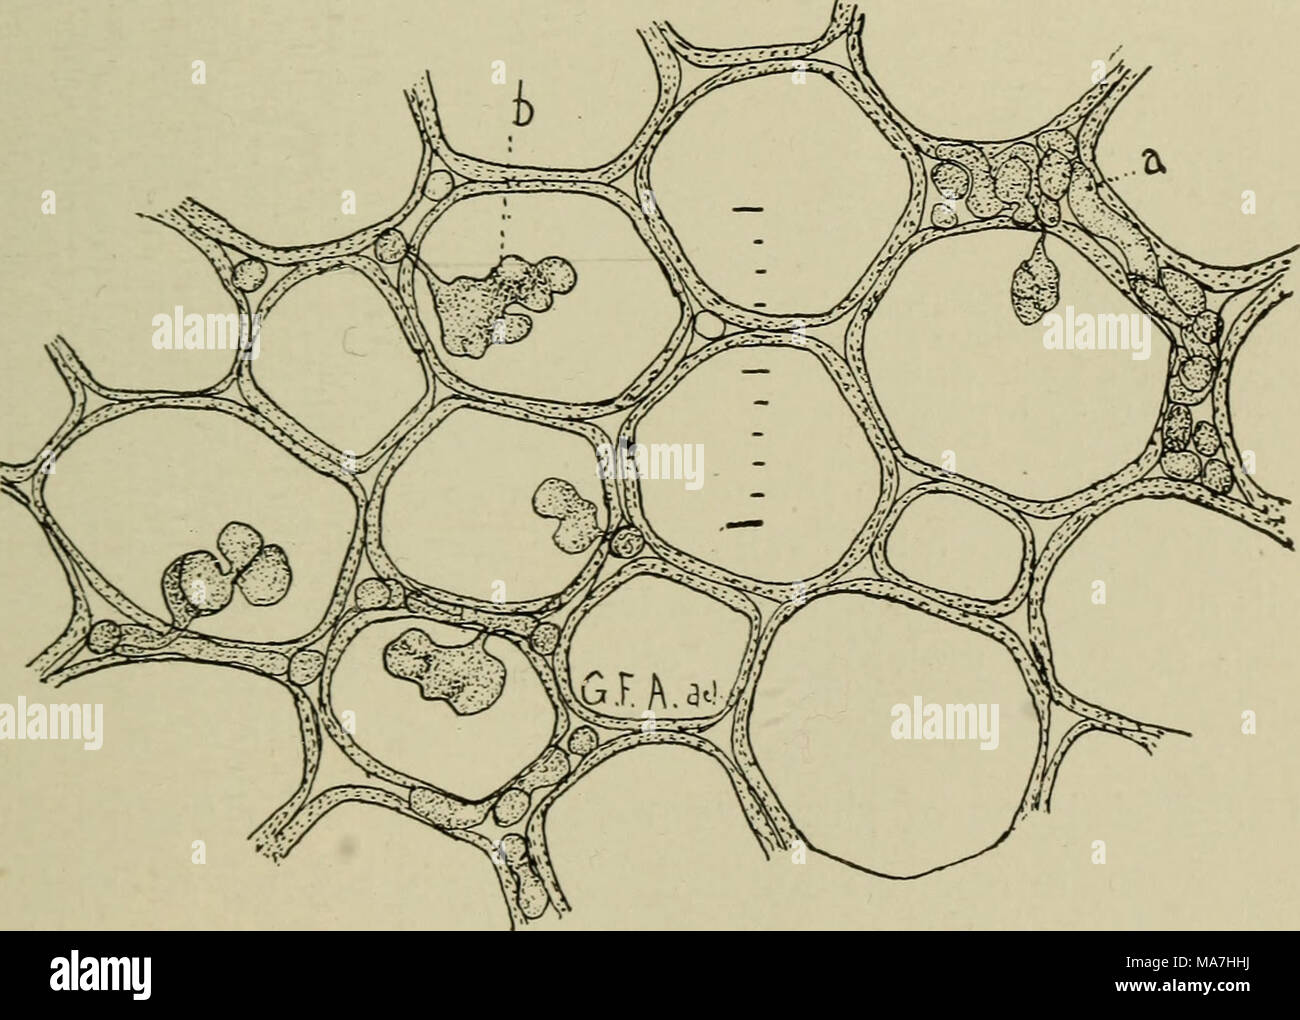 . Elementary botany . Fig. 426. Cells from the stem of a rusted carnation, showing the intercellular mycelium and haustoria. Object magnified 30 times more than the scale. fully made, and thin, the threads of the mycelium will be seen coursing be- tween^the cells of the leaf as slender threads. Here and there will be seen short branches of these threads which penetrate the cell wall of the host and project into the interior of the cell in the form of an irregular knob. Such a branch is a haustorium. Bv means of this haustorrum, which is here Stock Photo